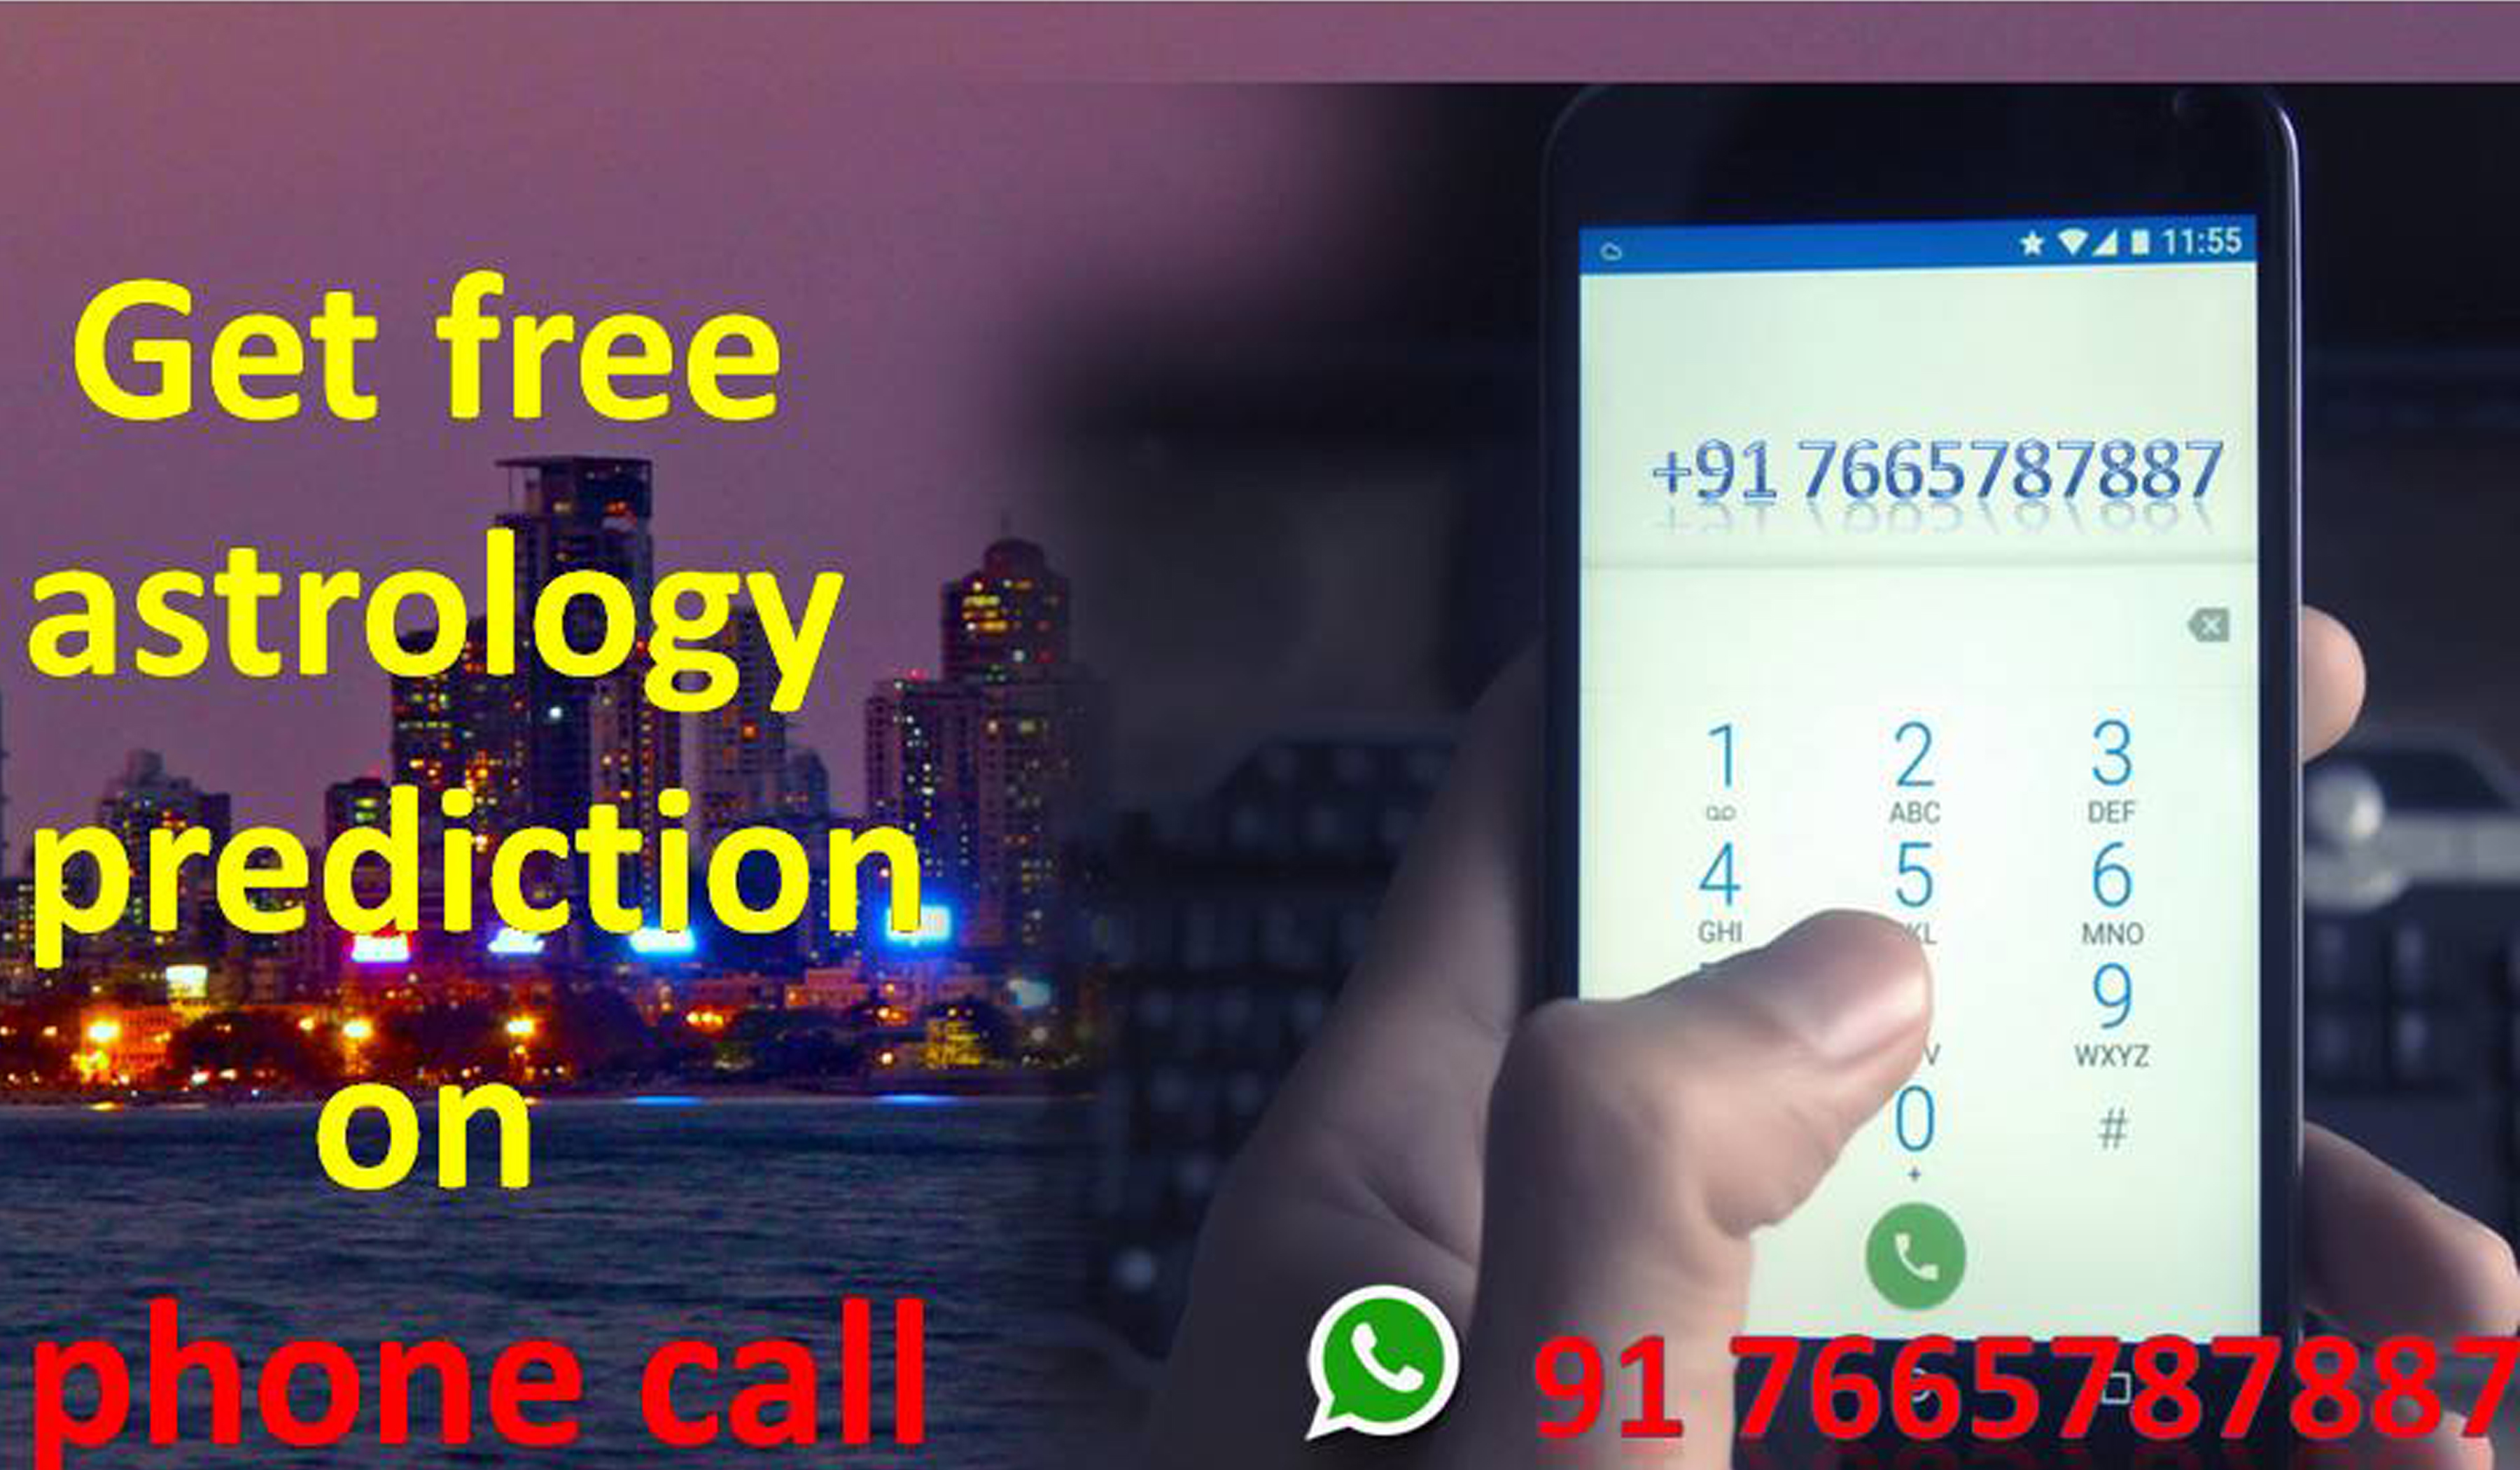 Get free astrology prediction on phone call by specialist Baba ji for black magic | Call +91 7665787887